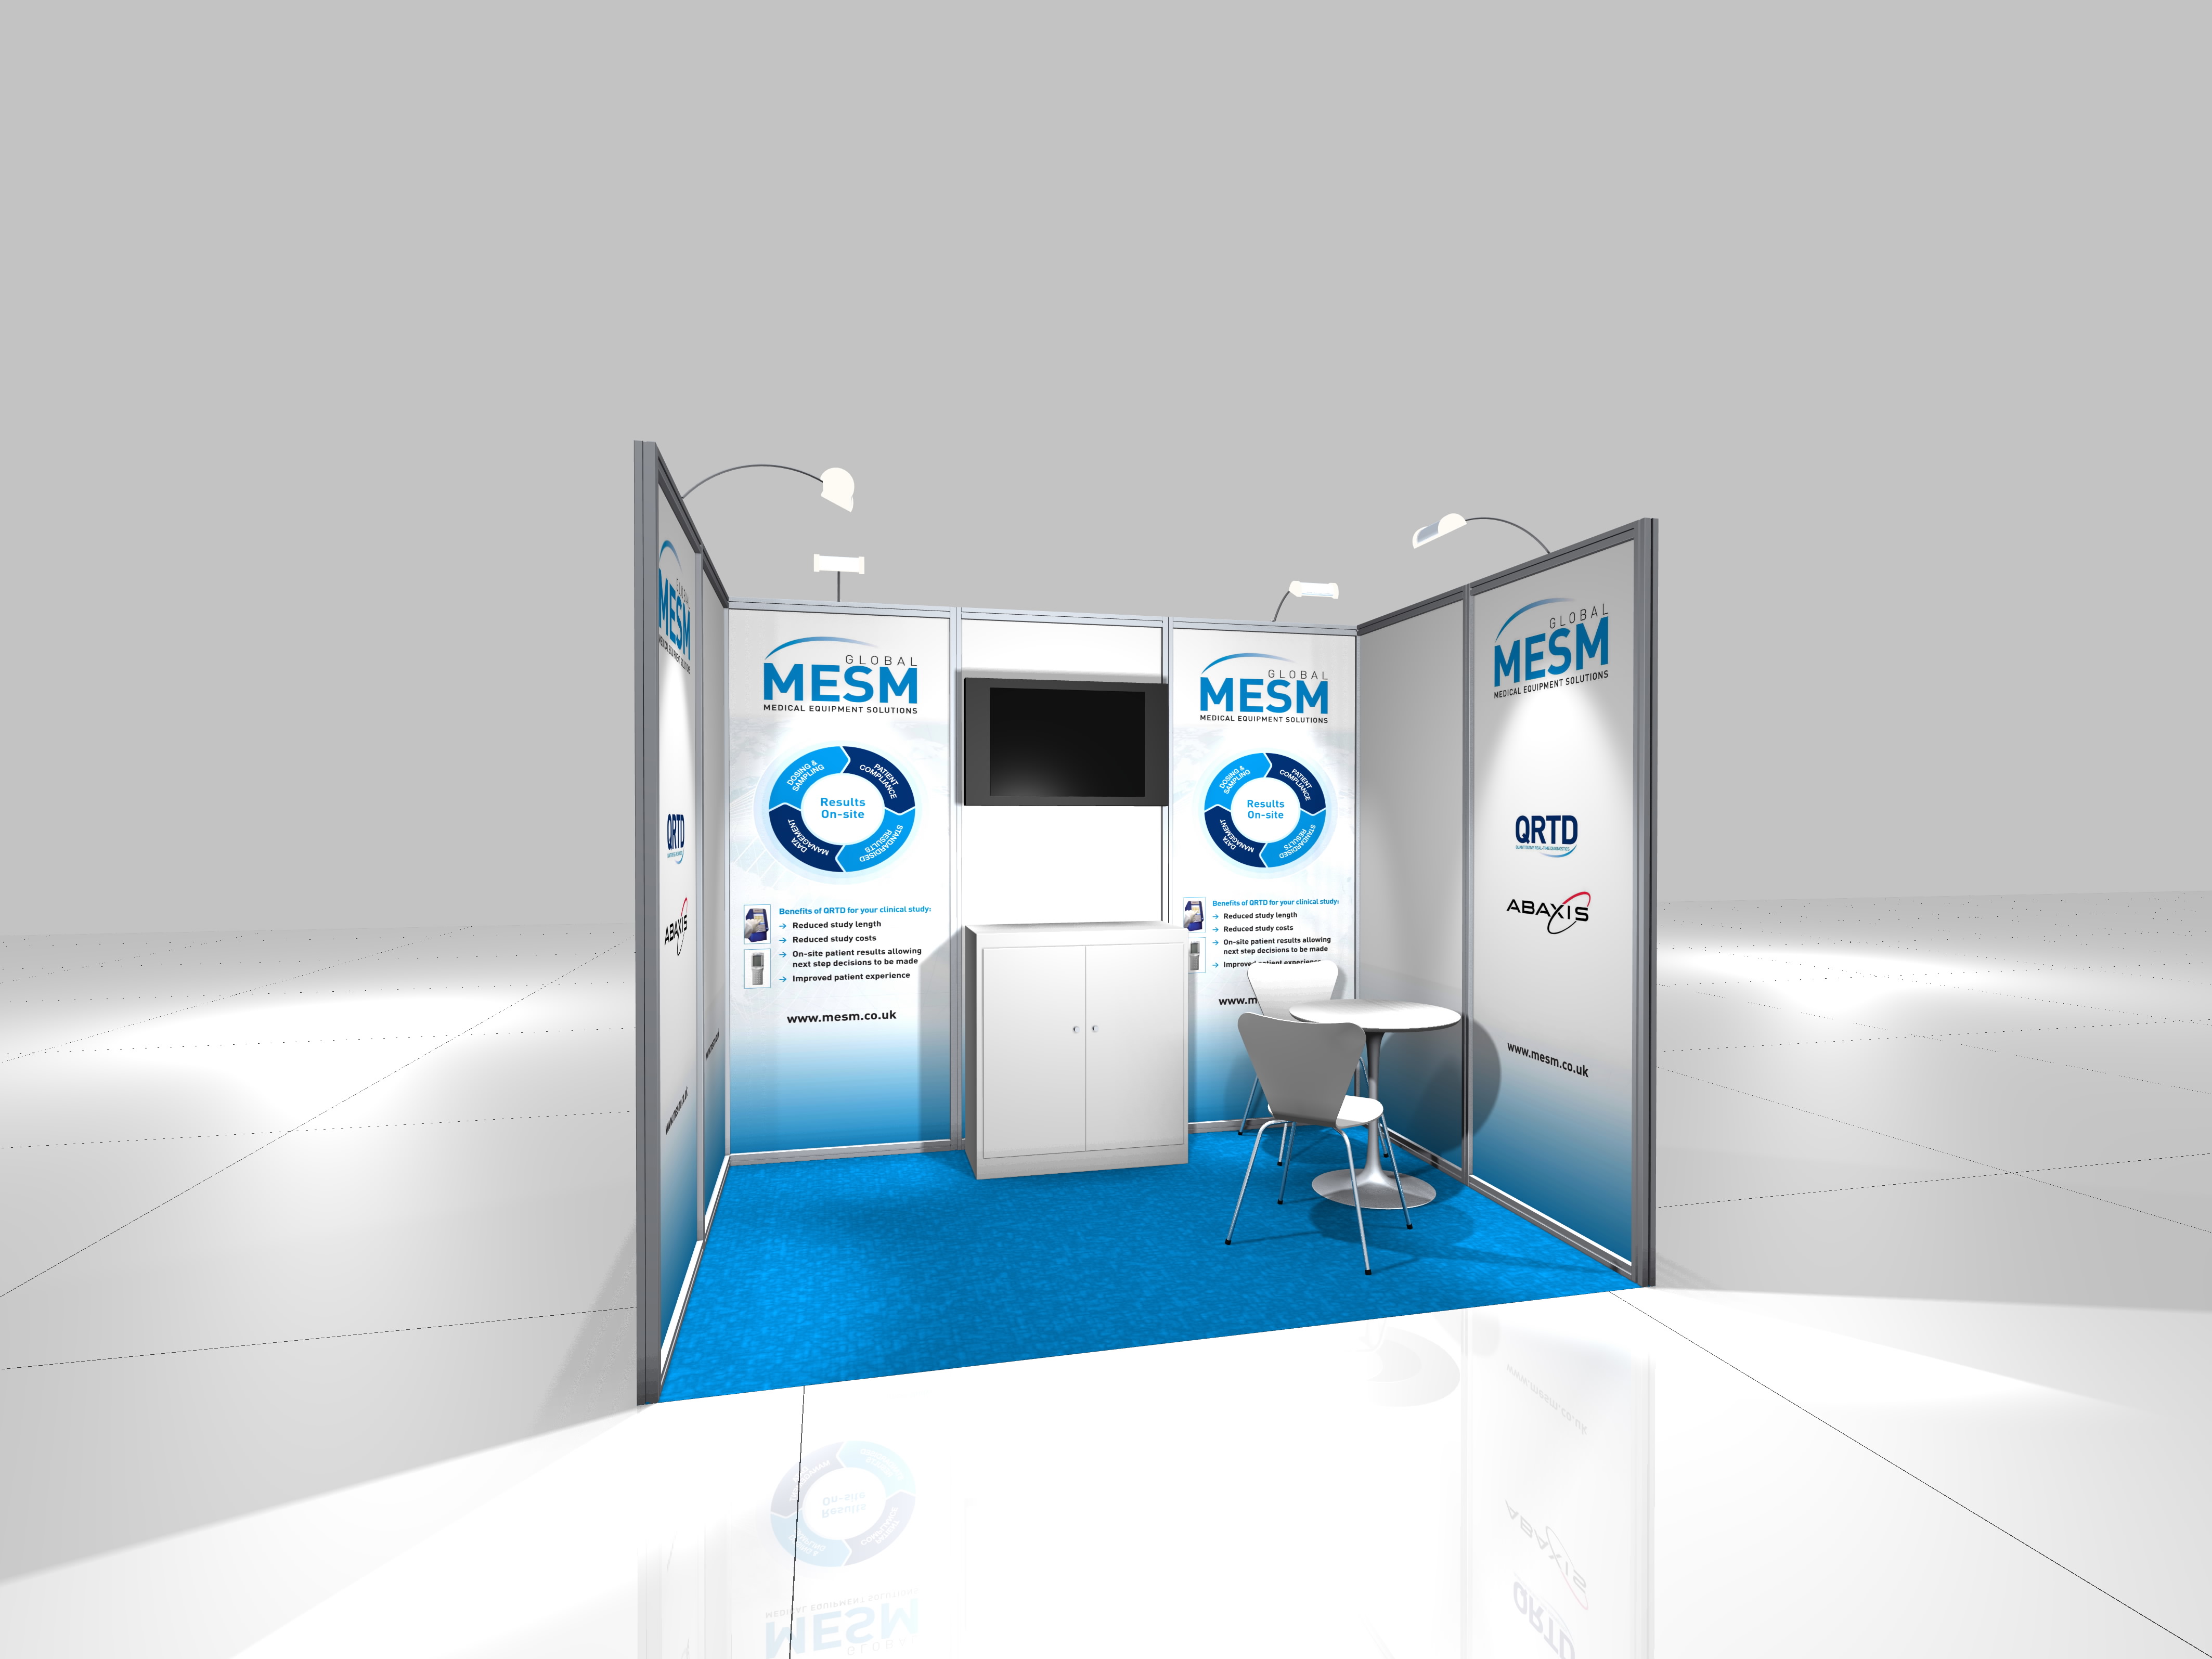 7 Trade Show Tips & Tricks For Building Exhibition Stands